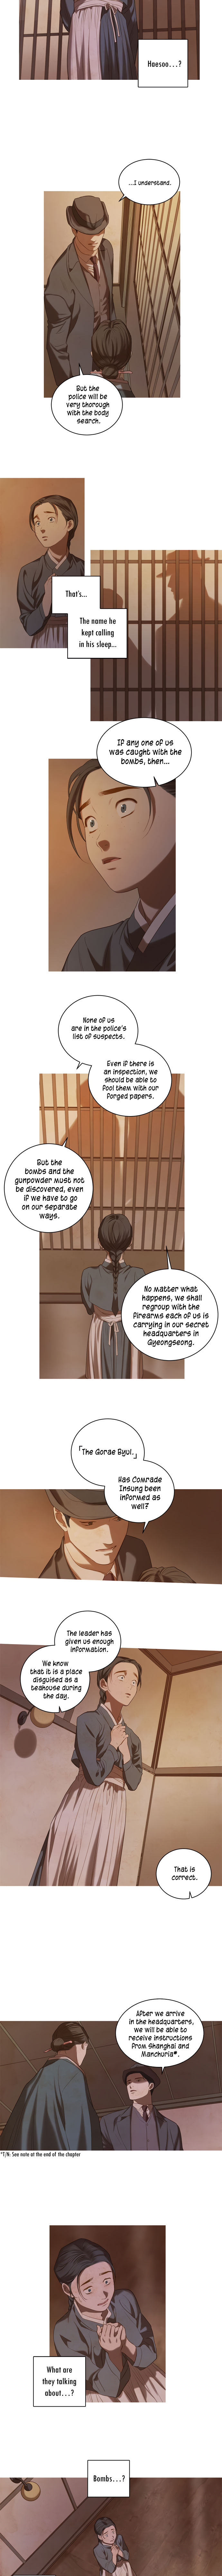 Gorae Byul - The Gyeongseong Mermaid - Chapter 7 Page 4